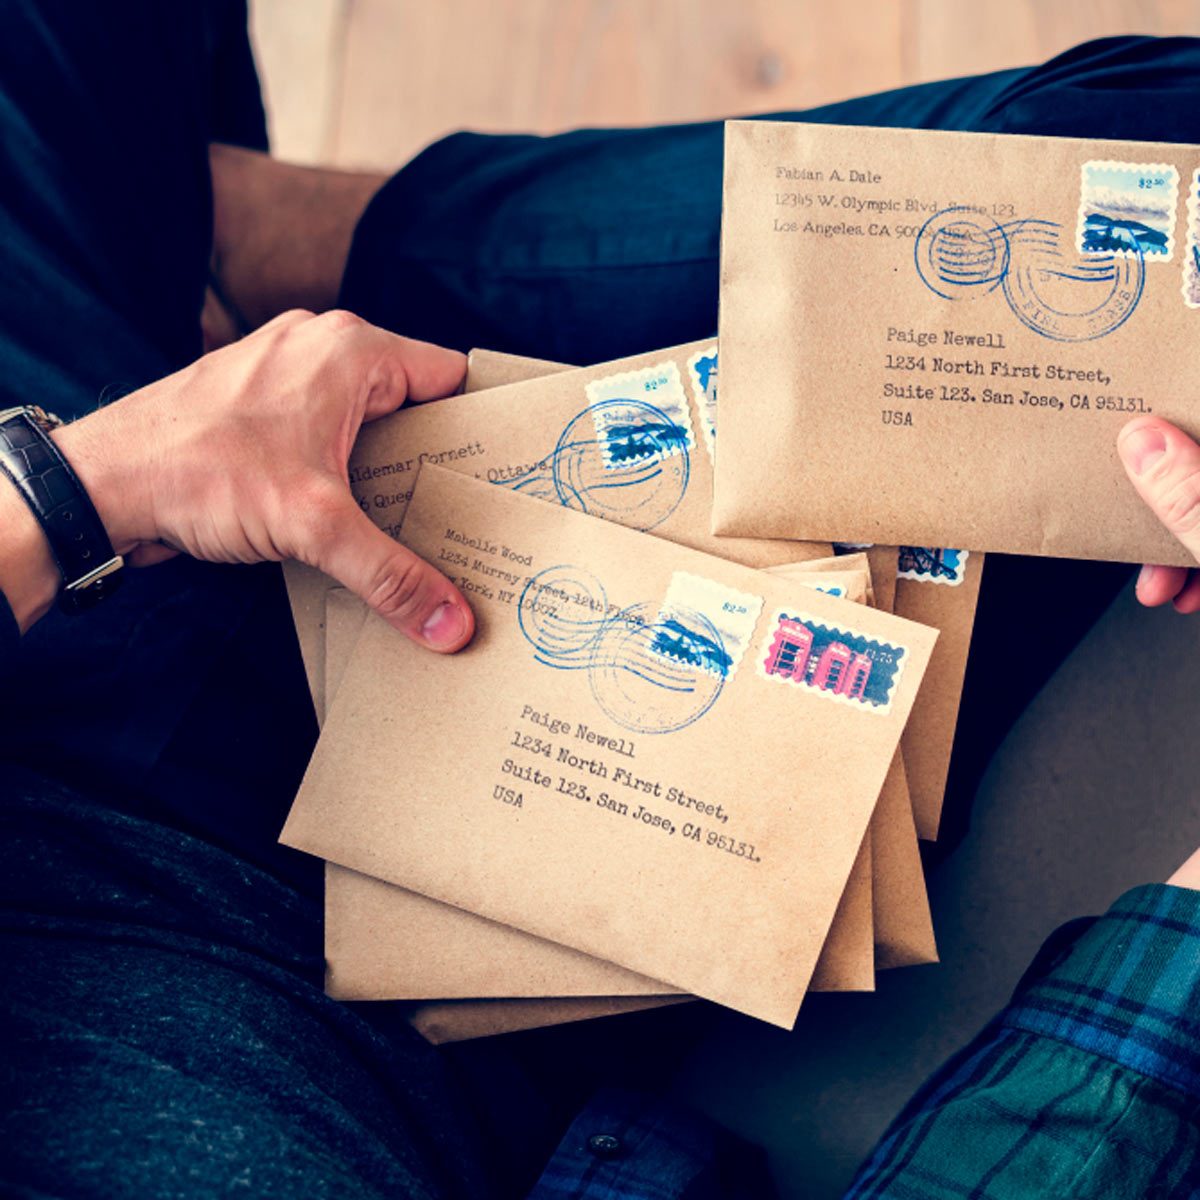 What happens to mail without postage?